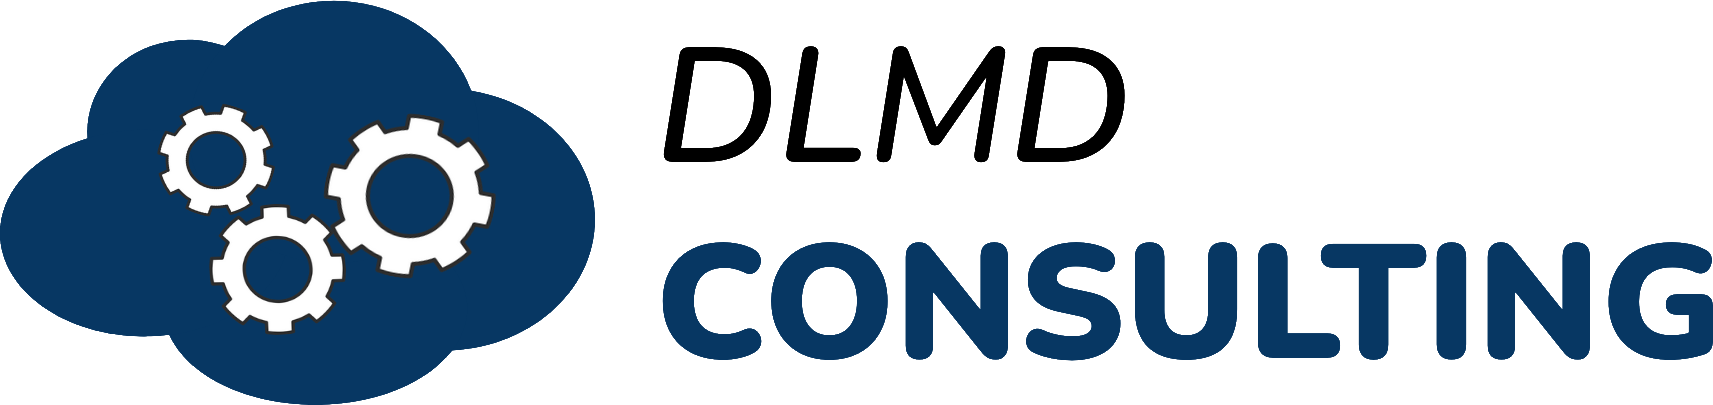 DLMD CONSULTING